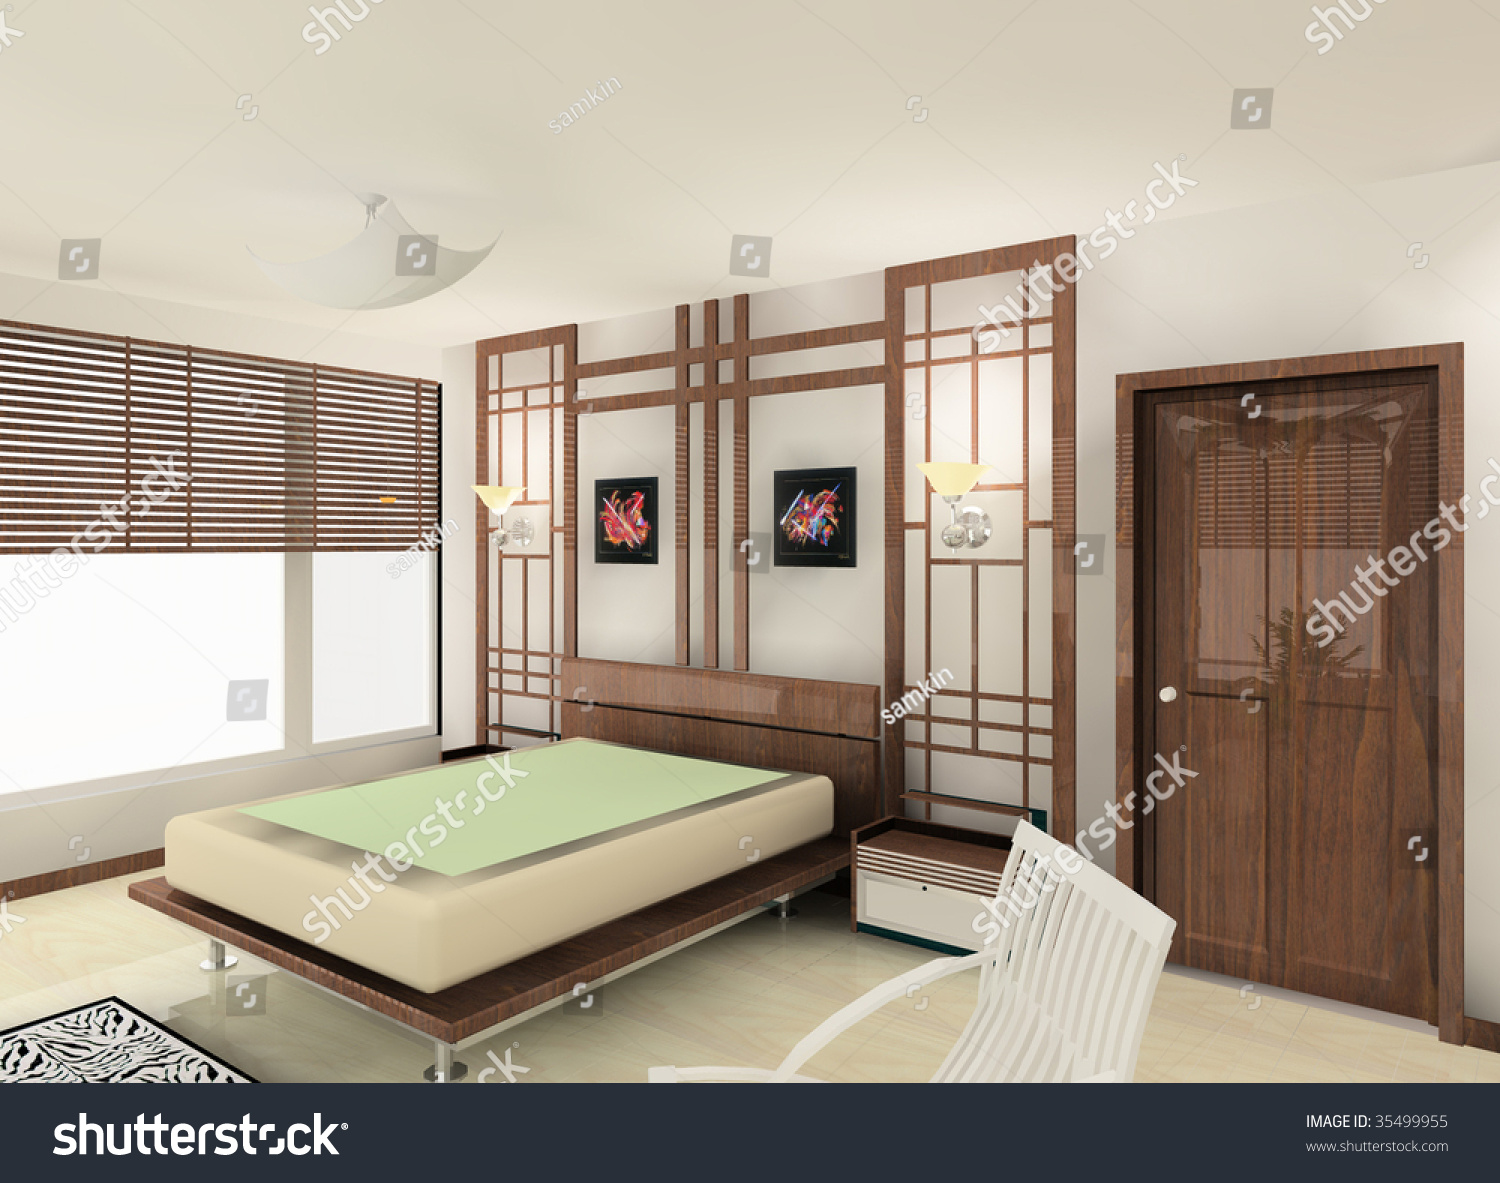 Chinese Style Bedroom Design Stockillustration 35499955